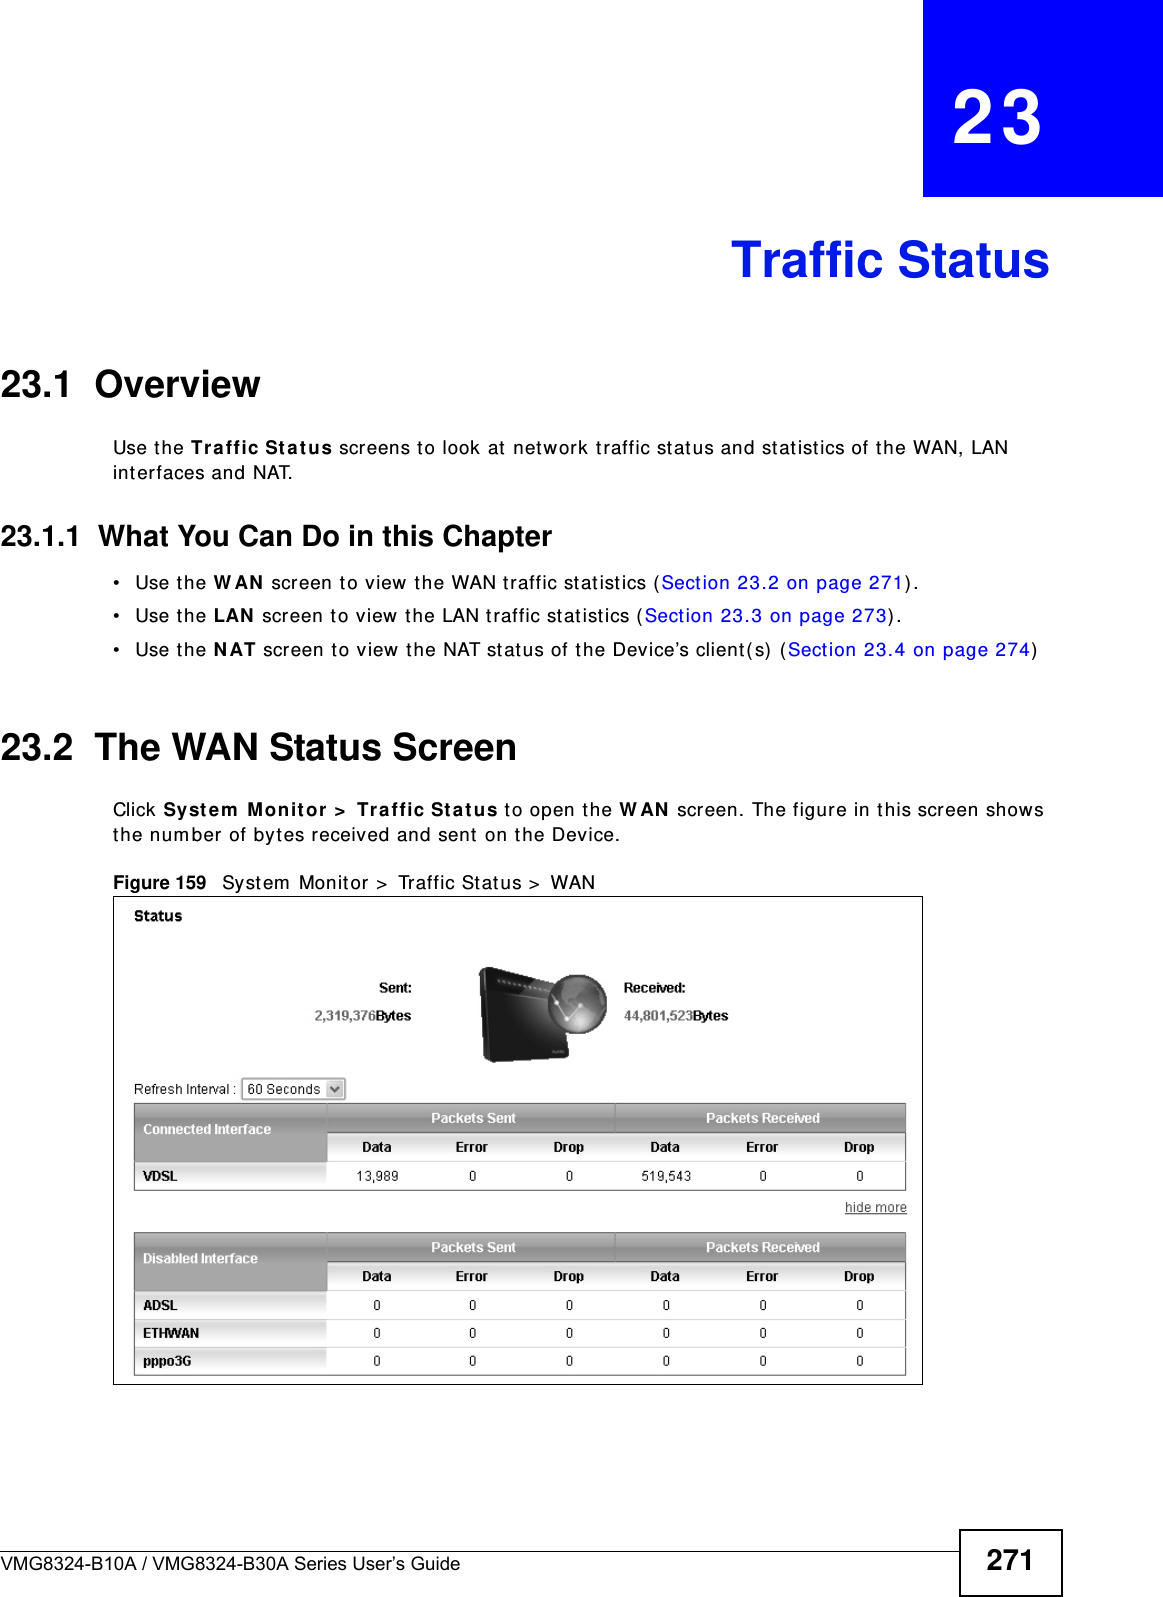 VMG8324-B10A / VMG8324-B30A Series User’s Guide 271CHAPTER   23Traffic Status23.1  OverviewUse t he Traffic St a tus screens to look at net work t raffic st atus and stat ist ics of the WAN, LAN interfaces and NAT. 23.1.1  What You Can Do in this Chapter• Use the W AN  screen t o view t he WAN traffic stat ist ics ( Sect ion 23.2 on page 271) .• Use the LAN screen to view t he LAN traffic stat ist ics (Section 23.3 on page 273) .• Use the N AT scr een to view t he NAT stat us of the Device’s client (s)  (Sect ion 23.4 on page 274)23.2  The WAN Status Screen Click Syste m  Monit or &gt;  Tra ffic St at us t o open the W AN  screen. The figure in t his screen shows the num ber of byt es received and sent on the Device.Figure 159   Syst em  Monit or &gt;  Traffic St atus &gt;  WAN